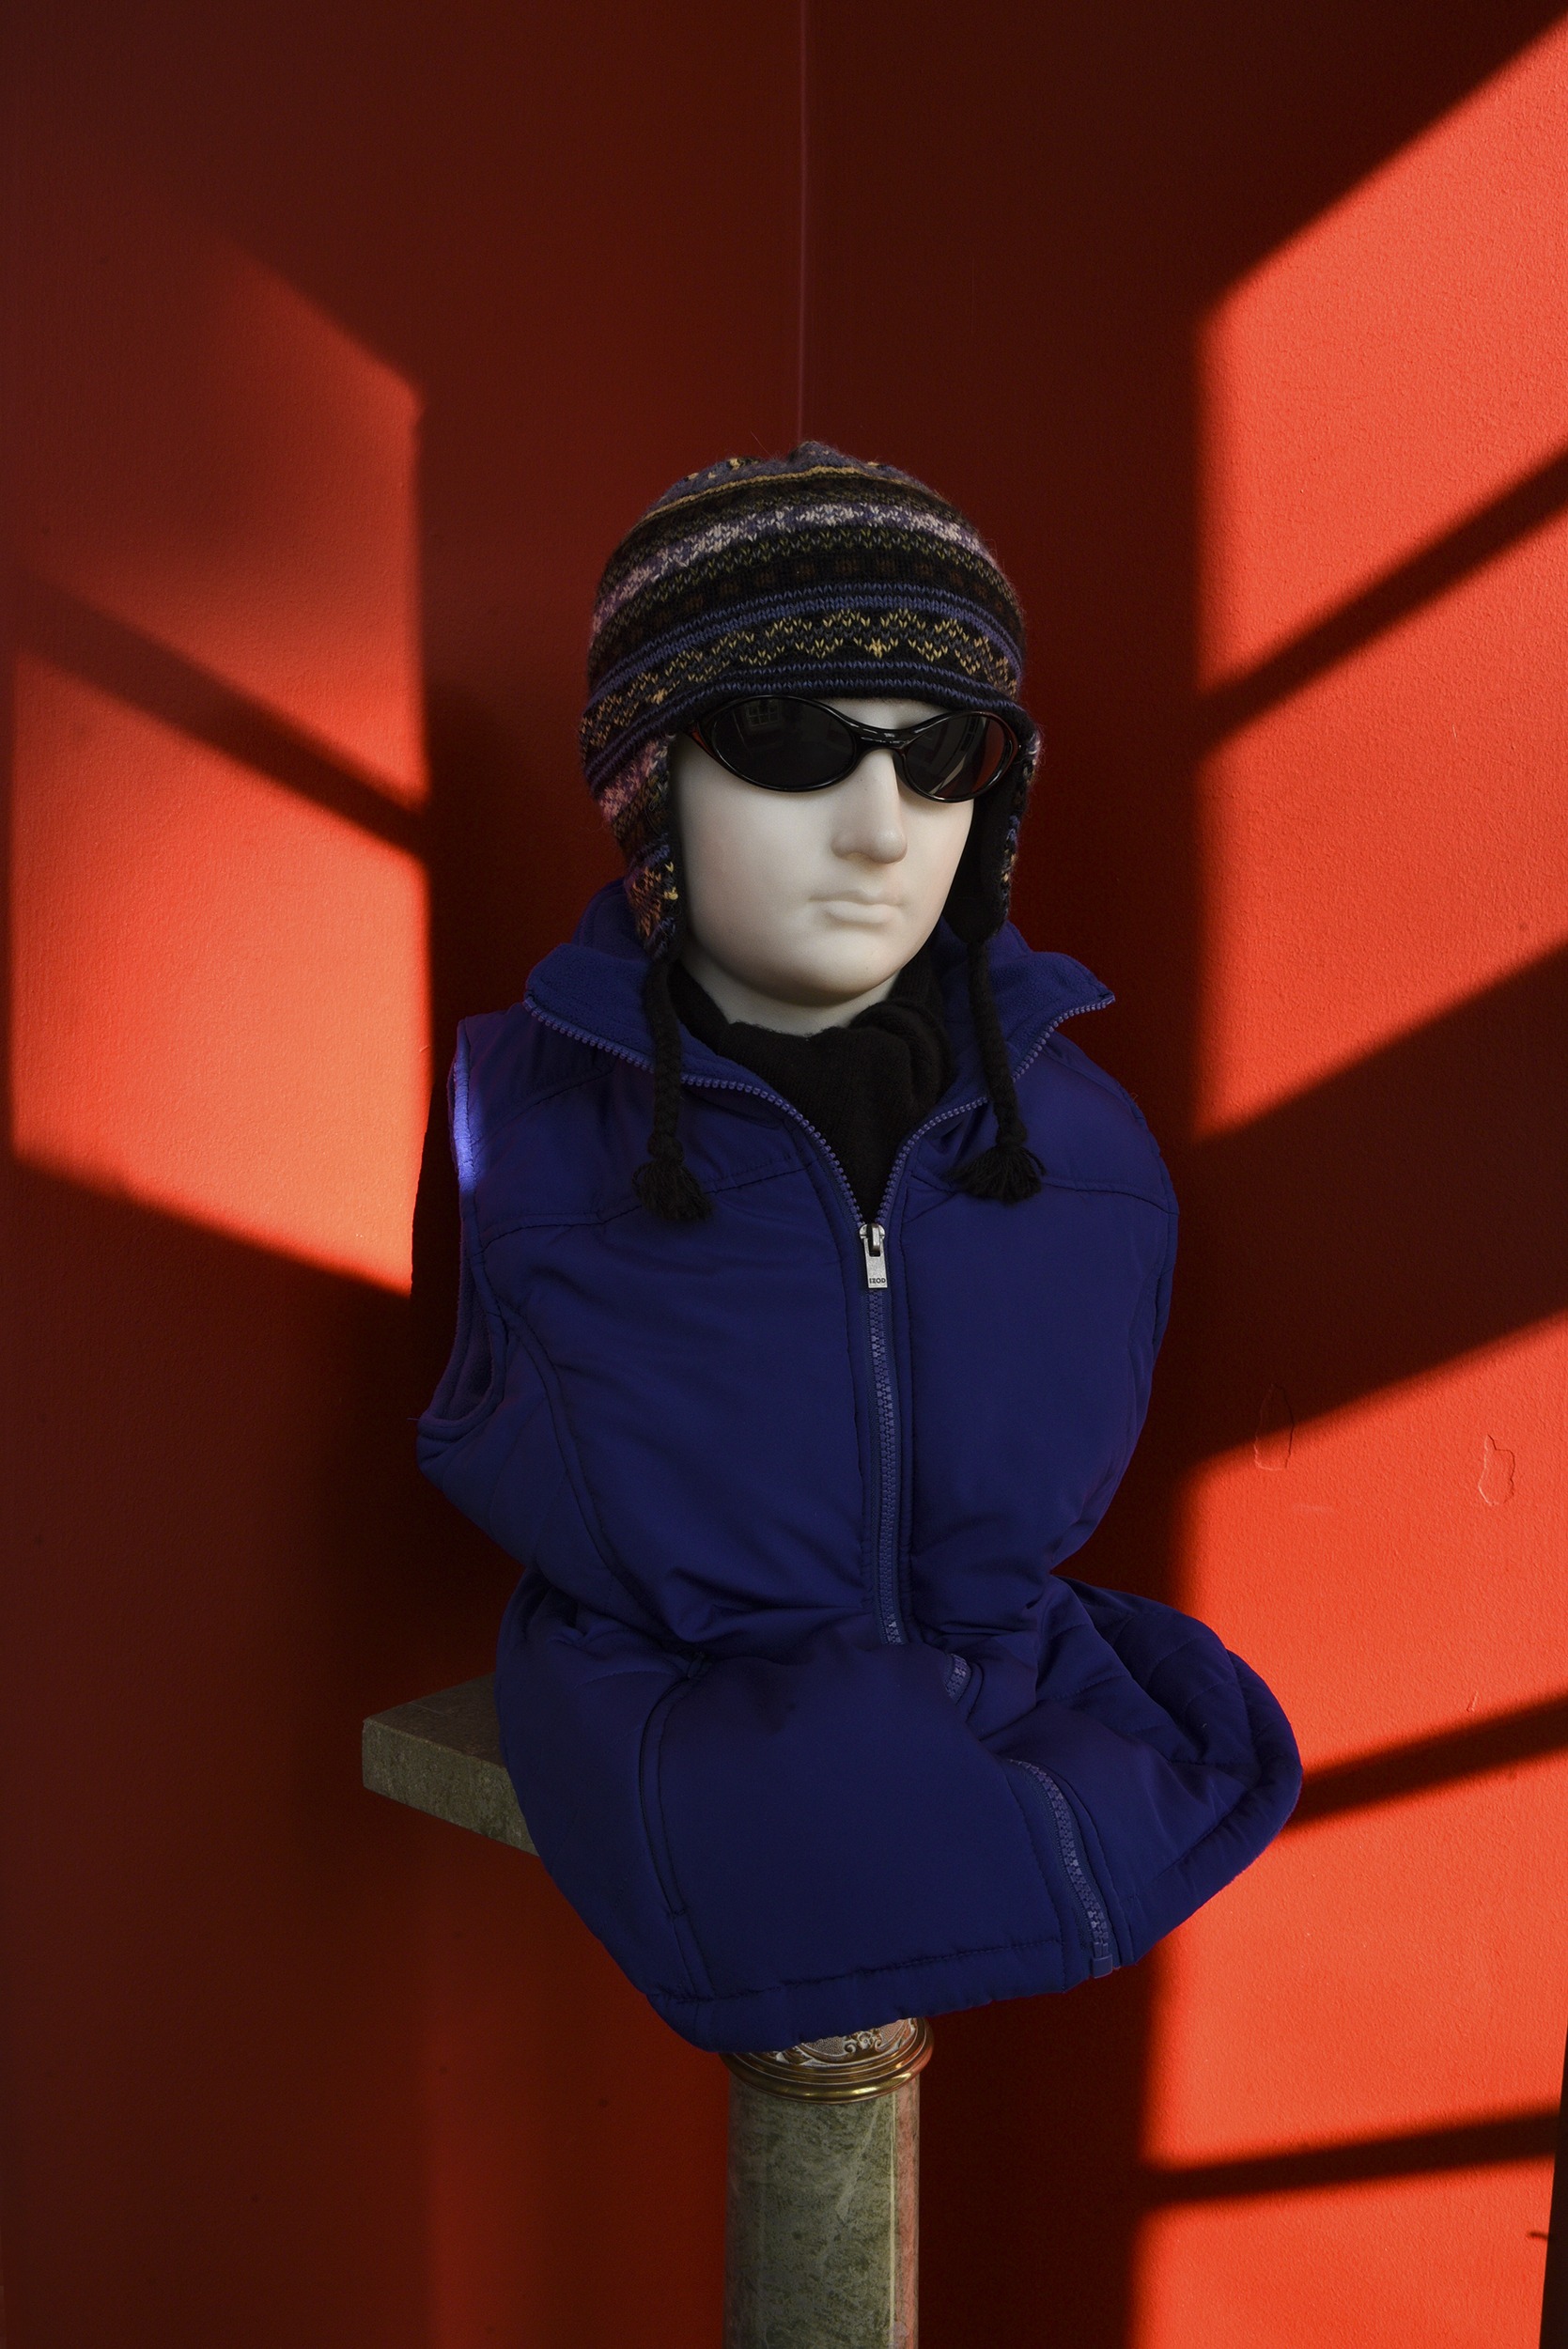 Just outside the Governors Study, a bust of a young man is whimsically dressed in ski gear and sunglasses. Geometric patches of sunlight on crimson walls frames the figure.